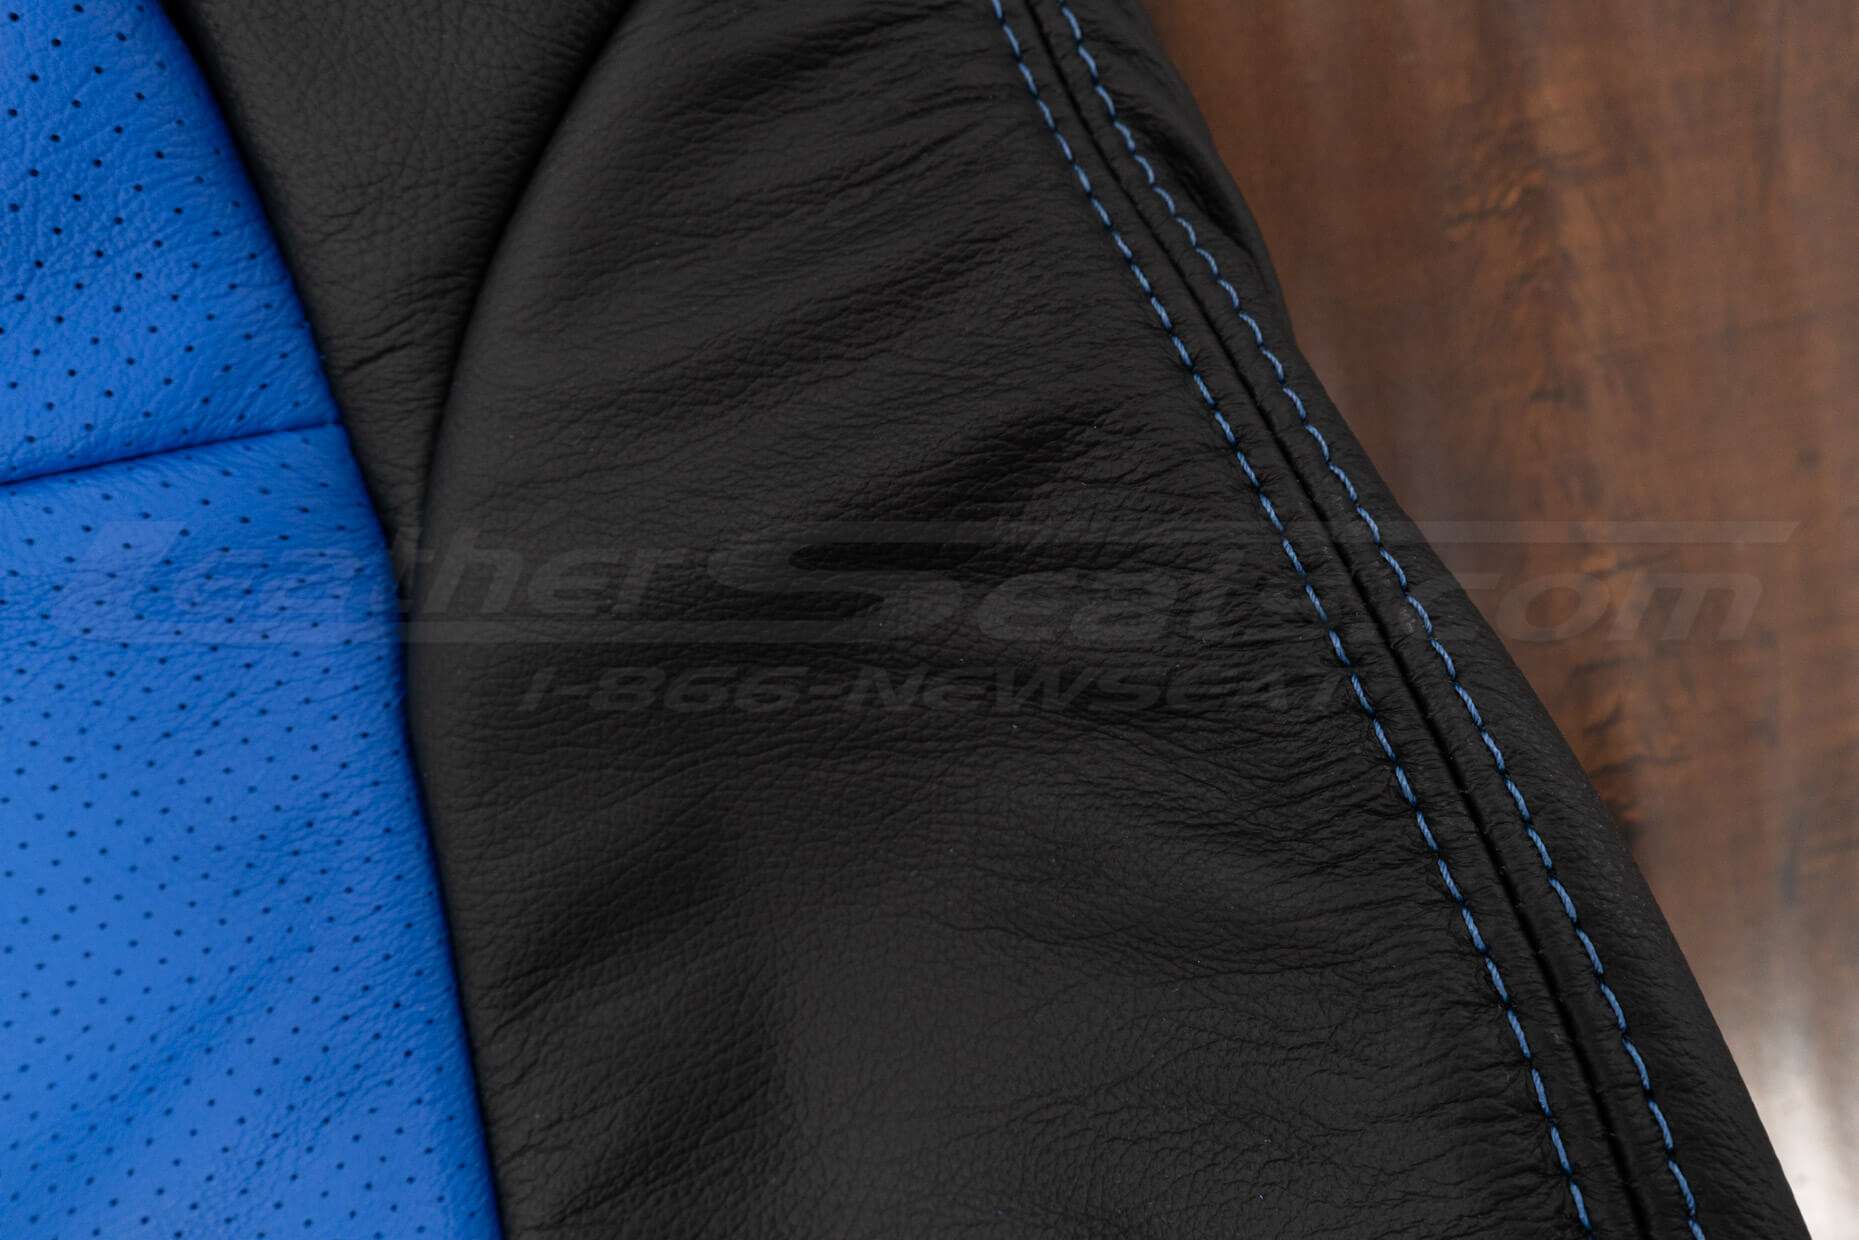 Contrasting Cobalt double-stitching